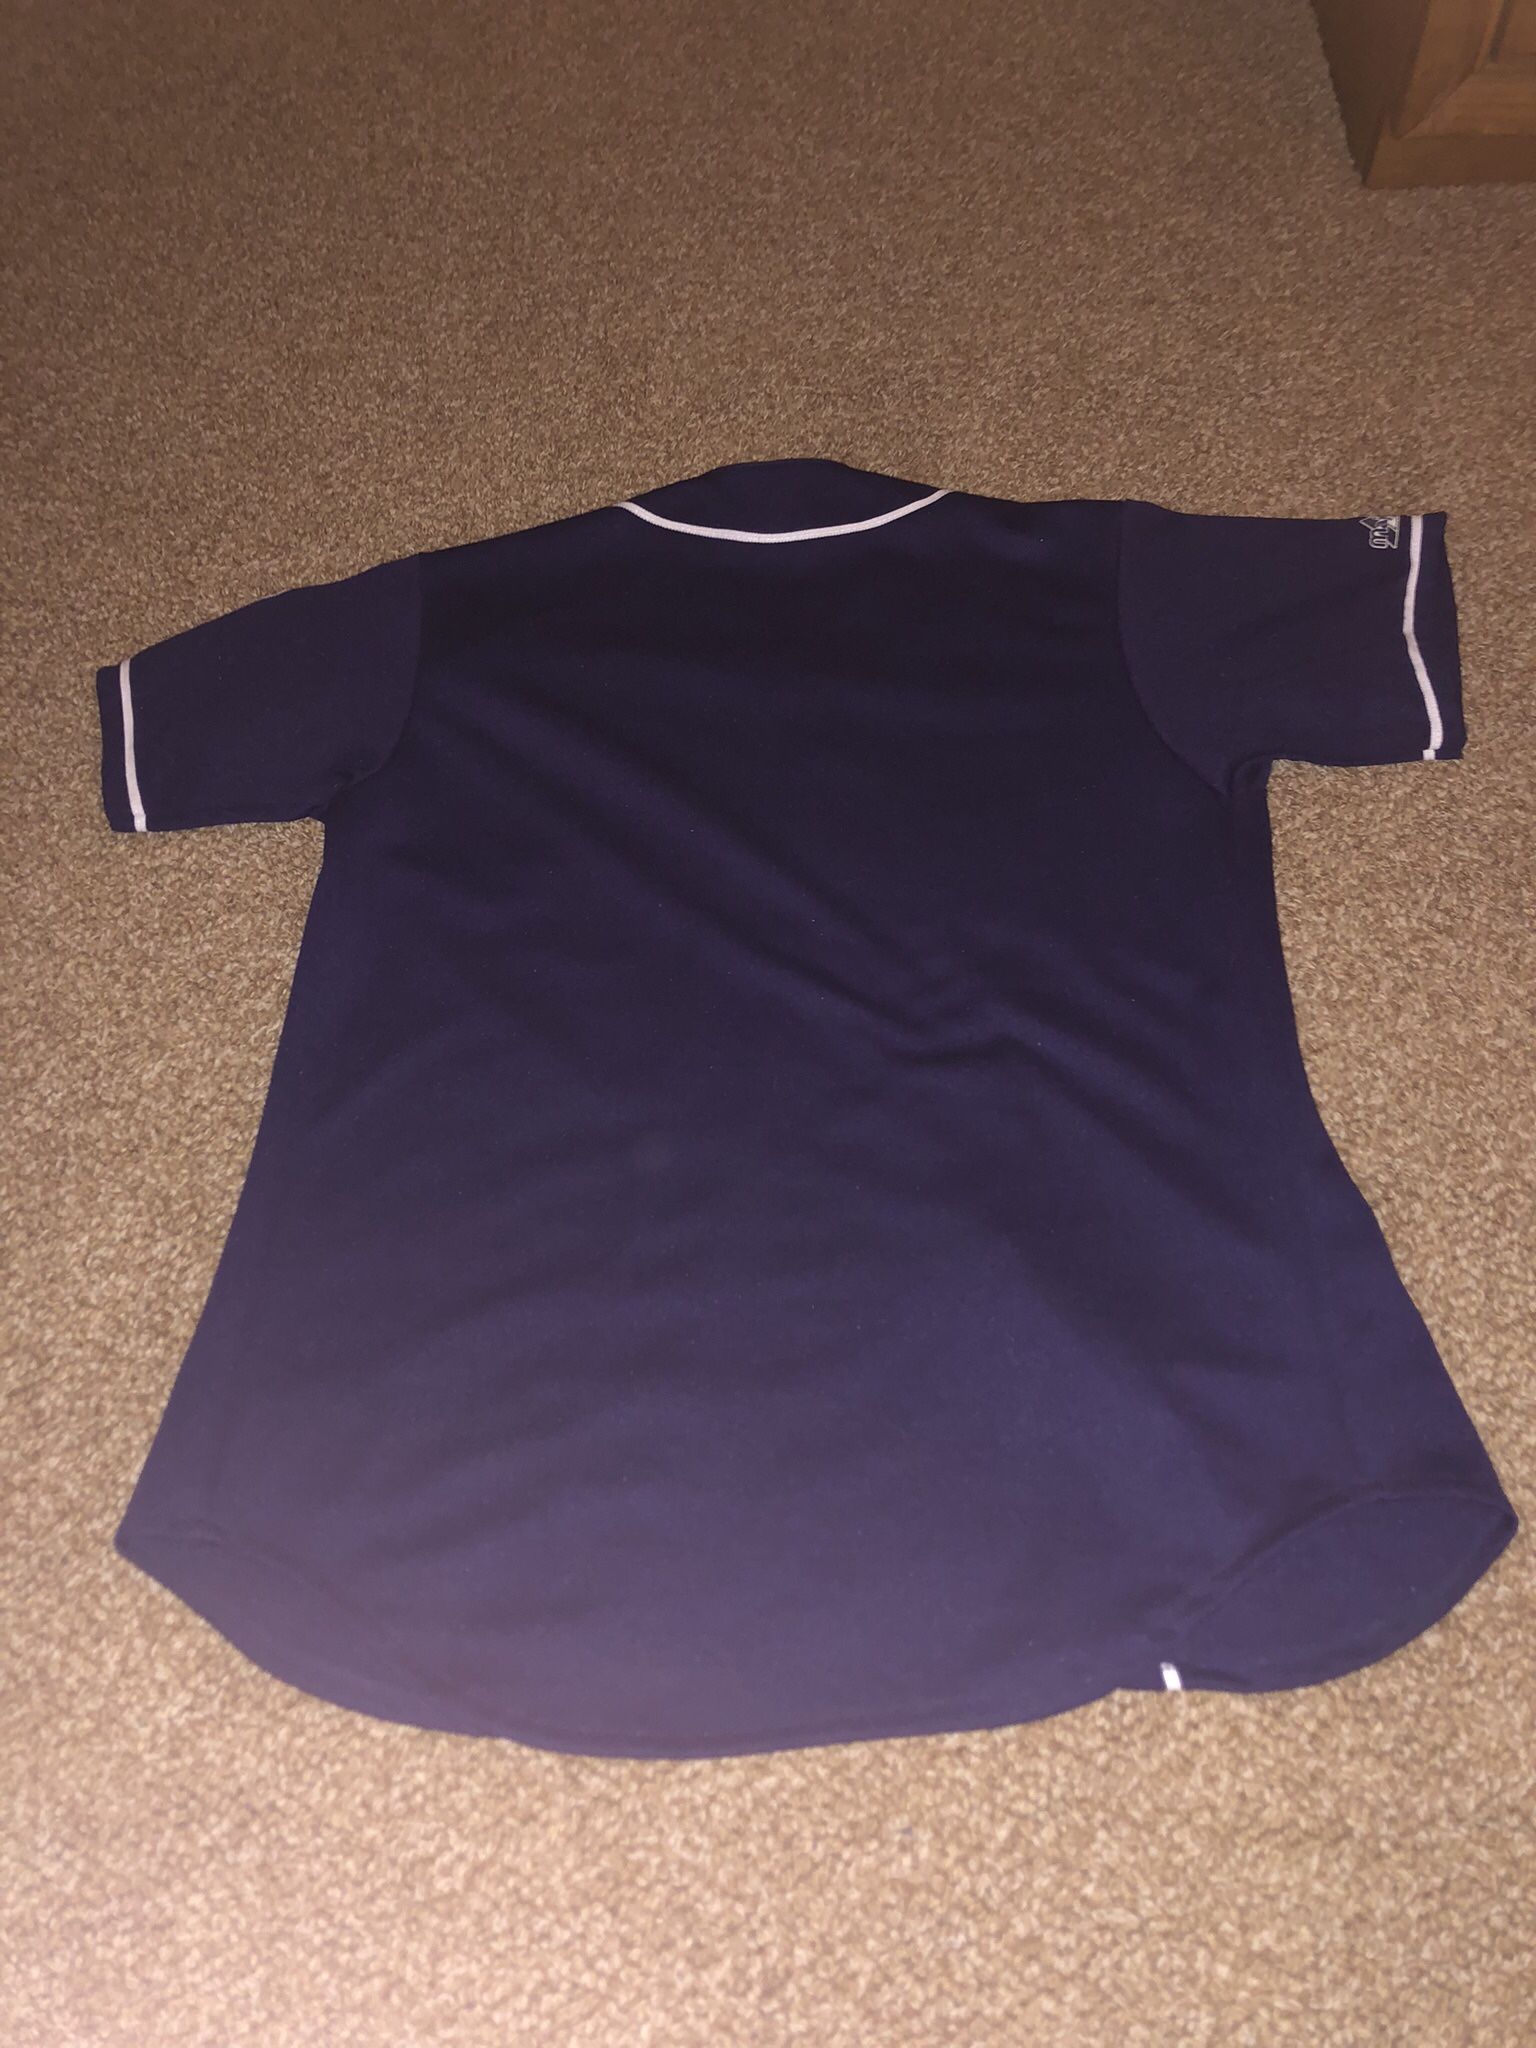 Padres Jersey for Sale in Poway, CA - OfferUp